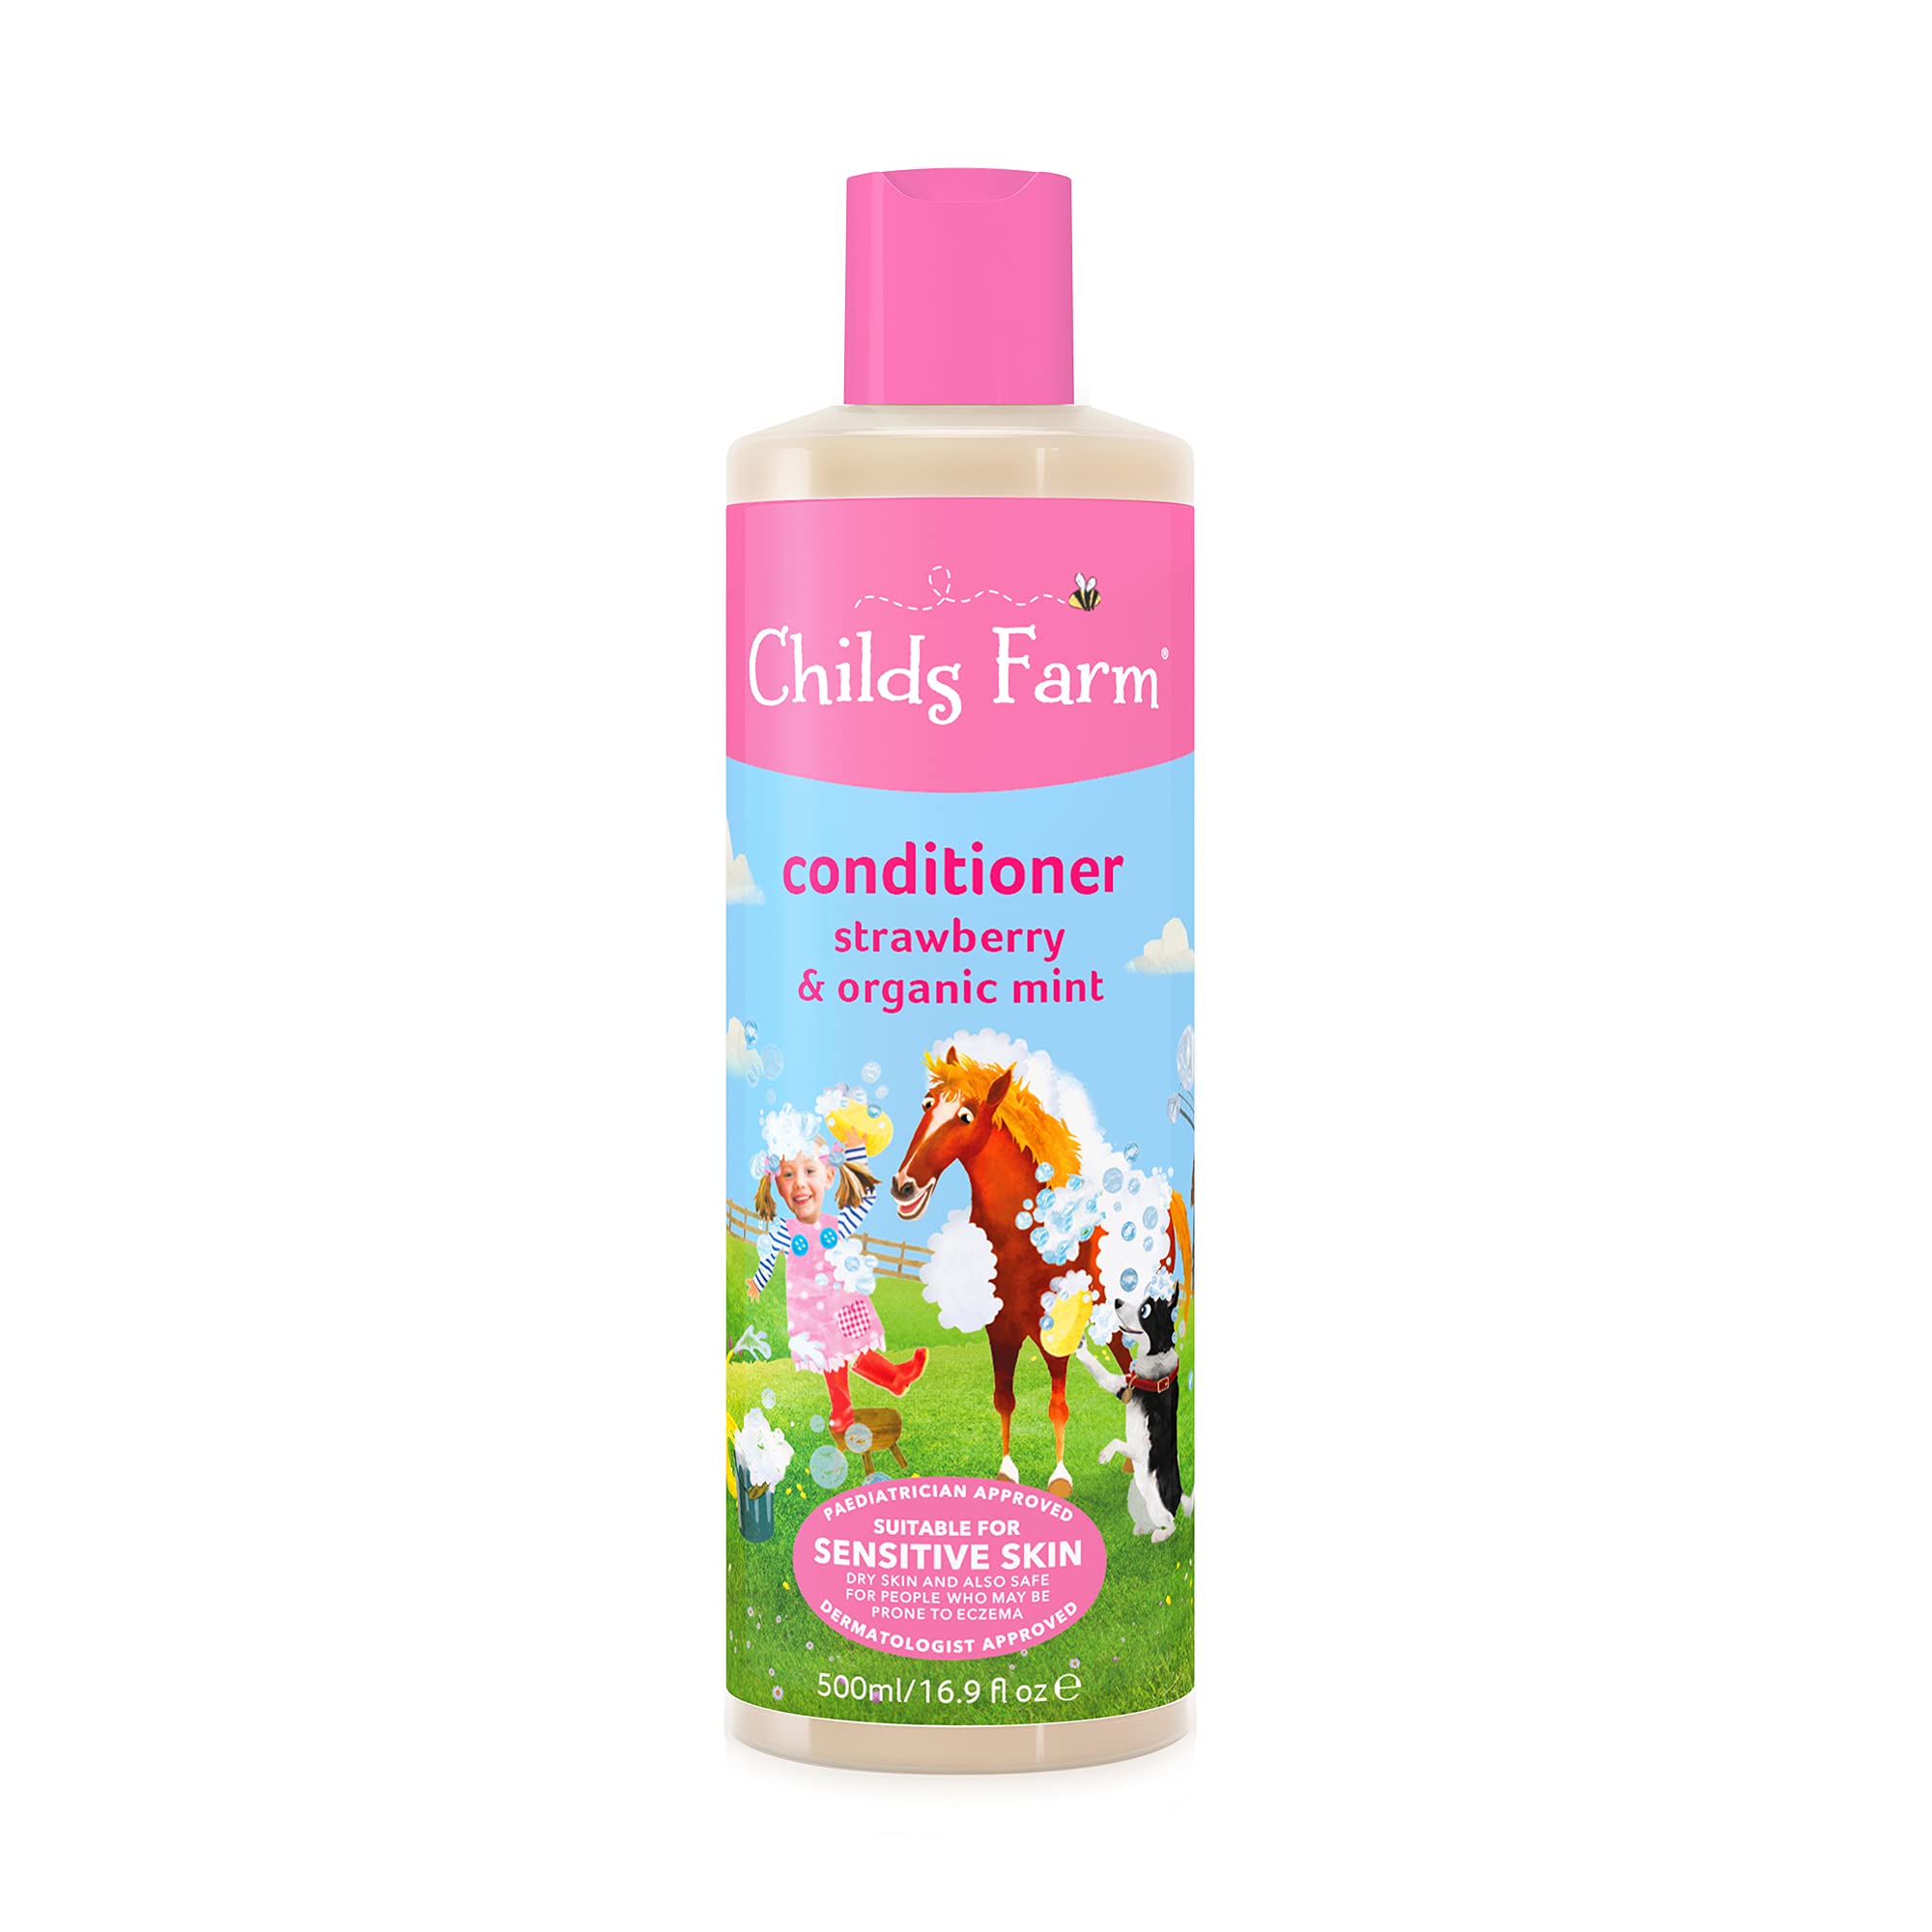 CHILDS FARM Conditioner - Strawberry and Organic Mint, 500ml